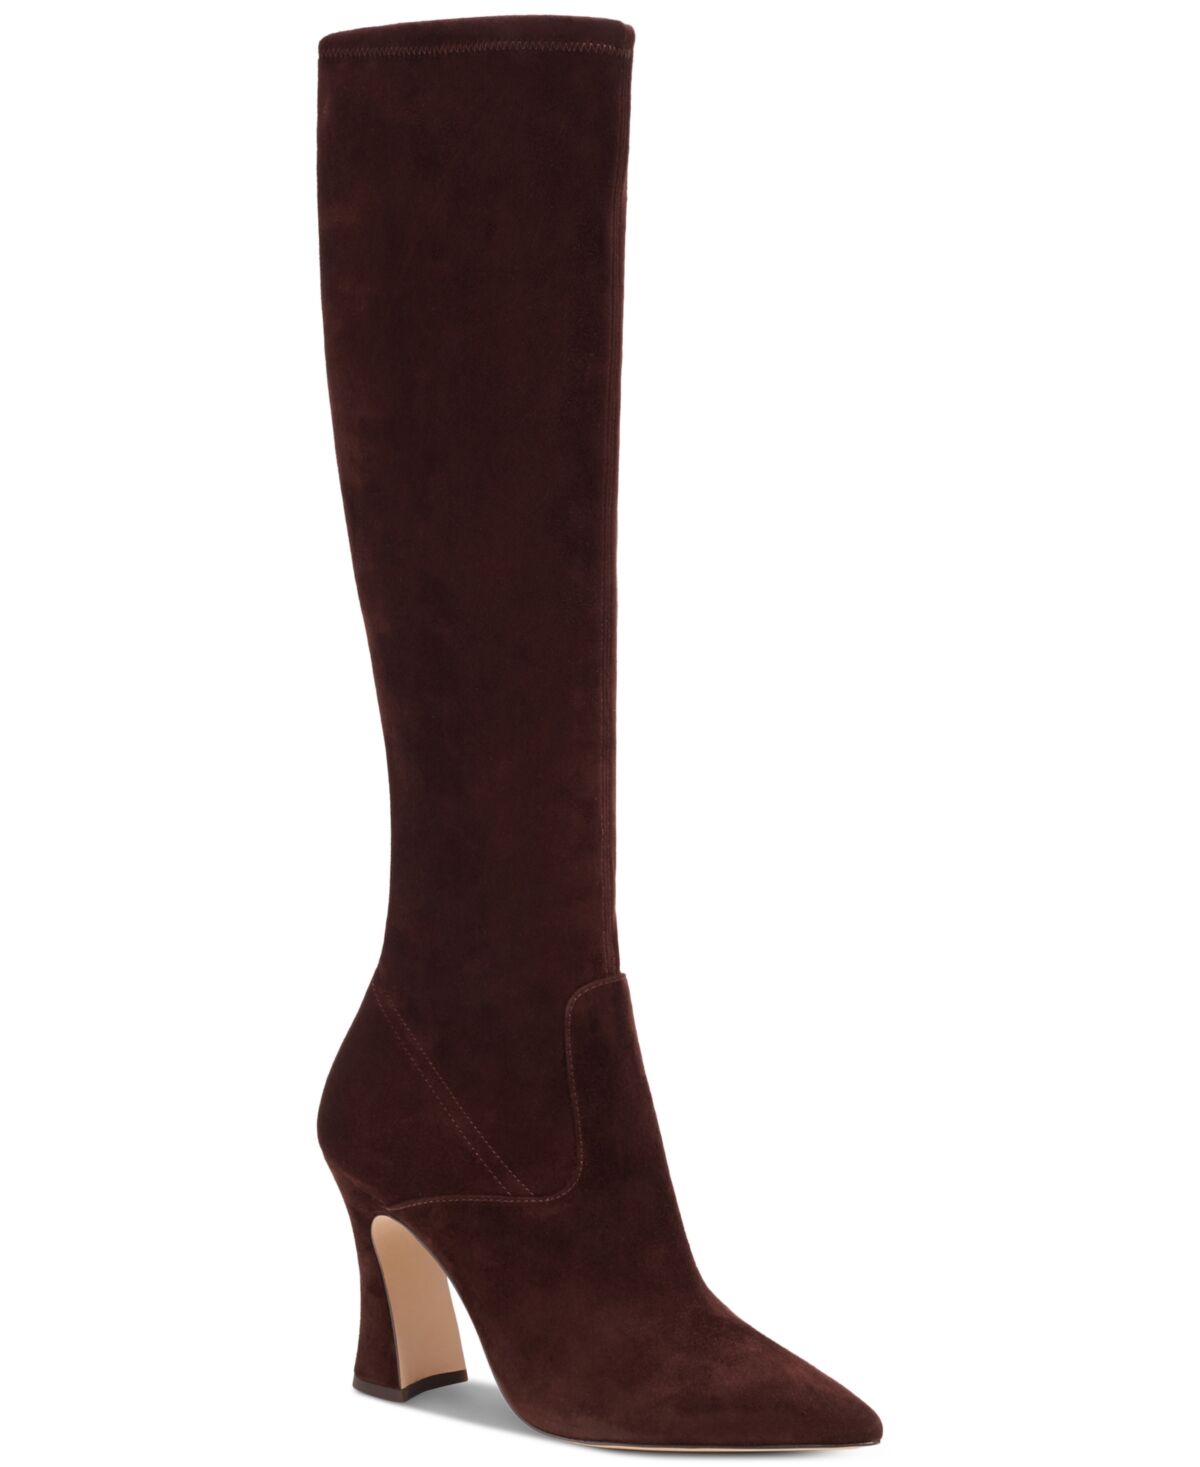 Coach Women's Cece Stretch Pointed Toe Knee High Dress Boots - Maple Suede